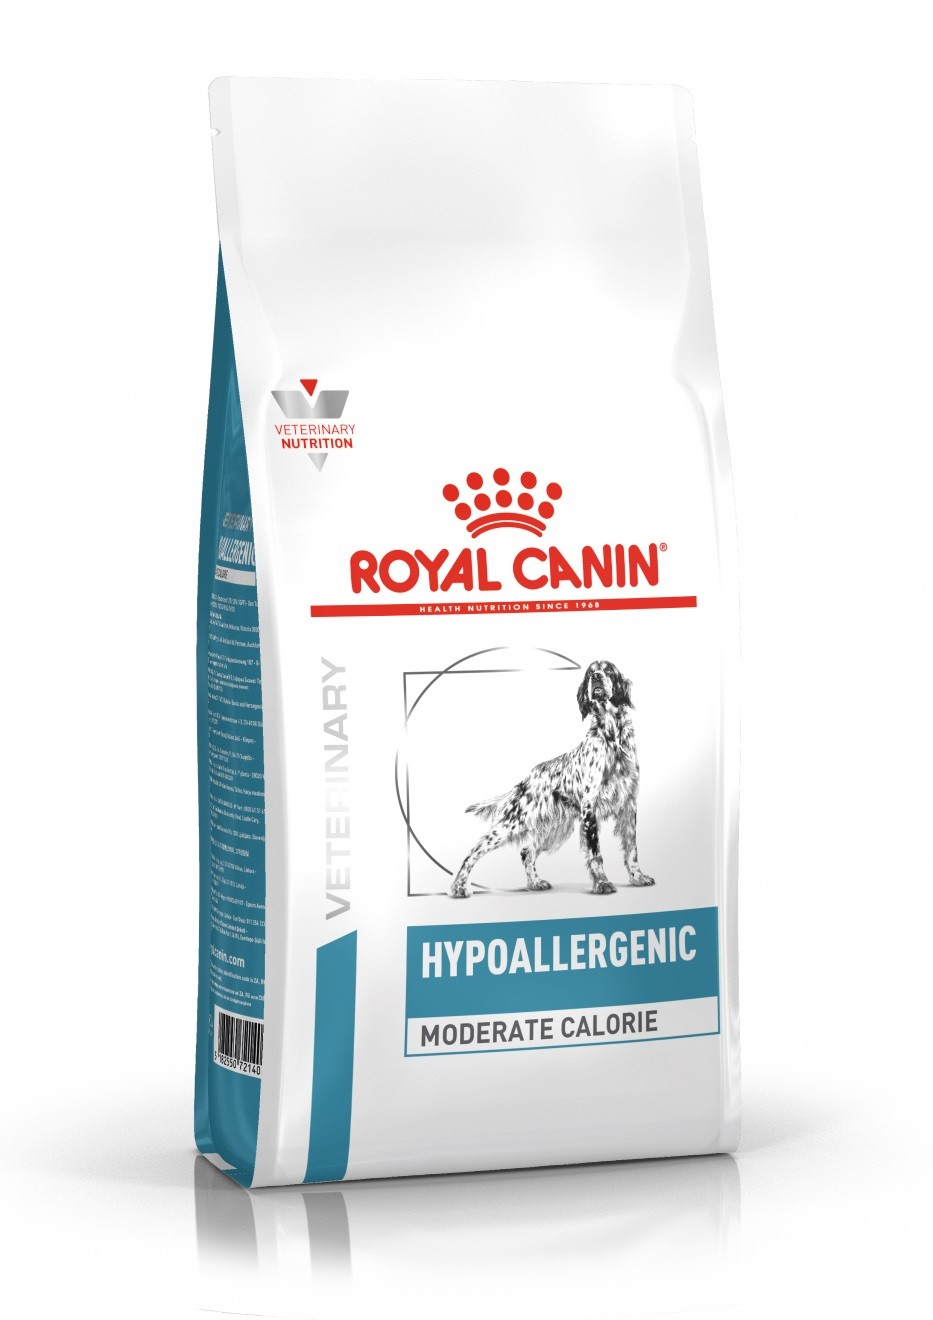 Royal Canin Veterinary Diet Hypoallergenic Moderate Calorie HME23